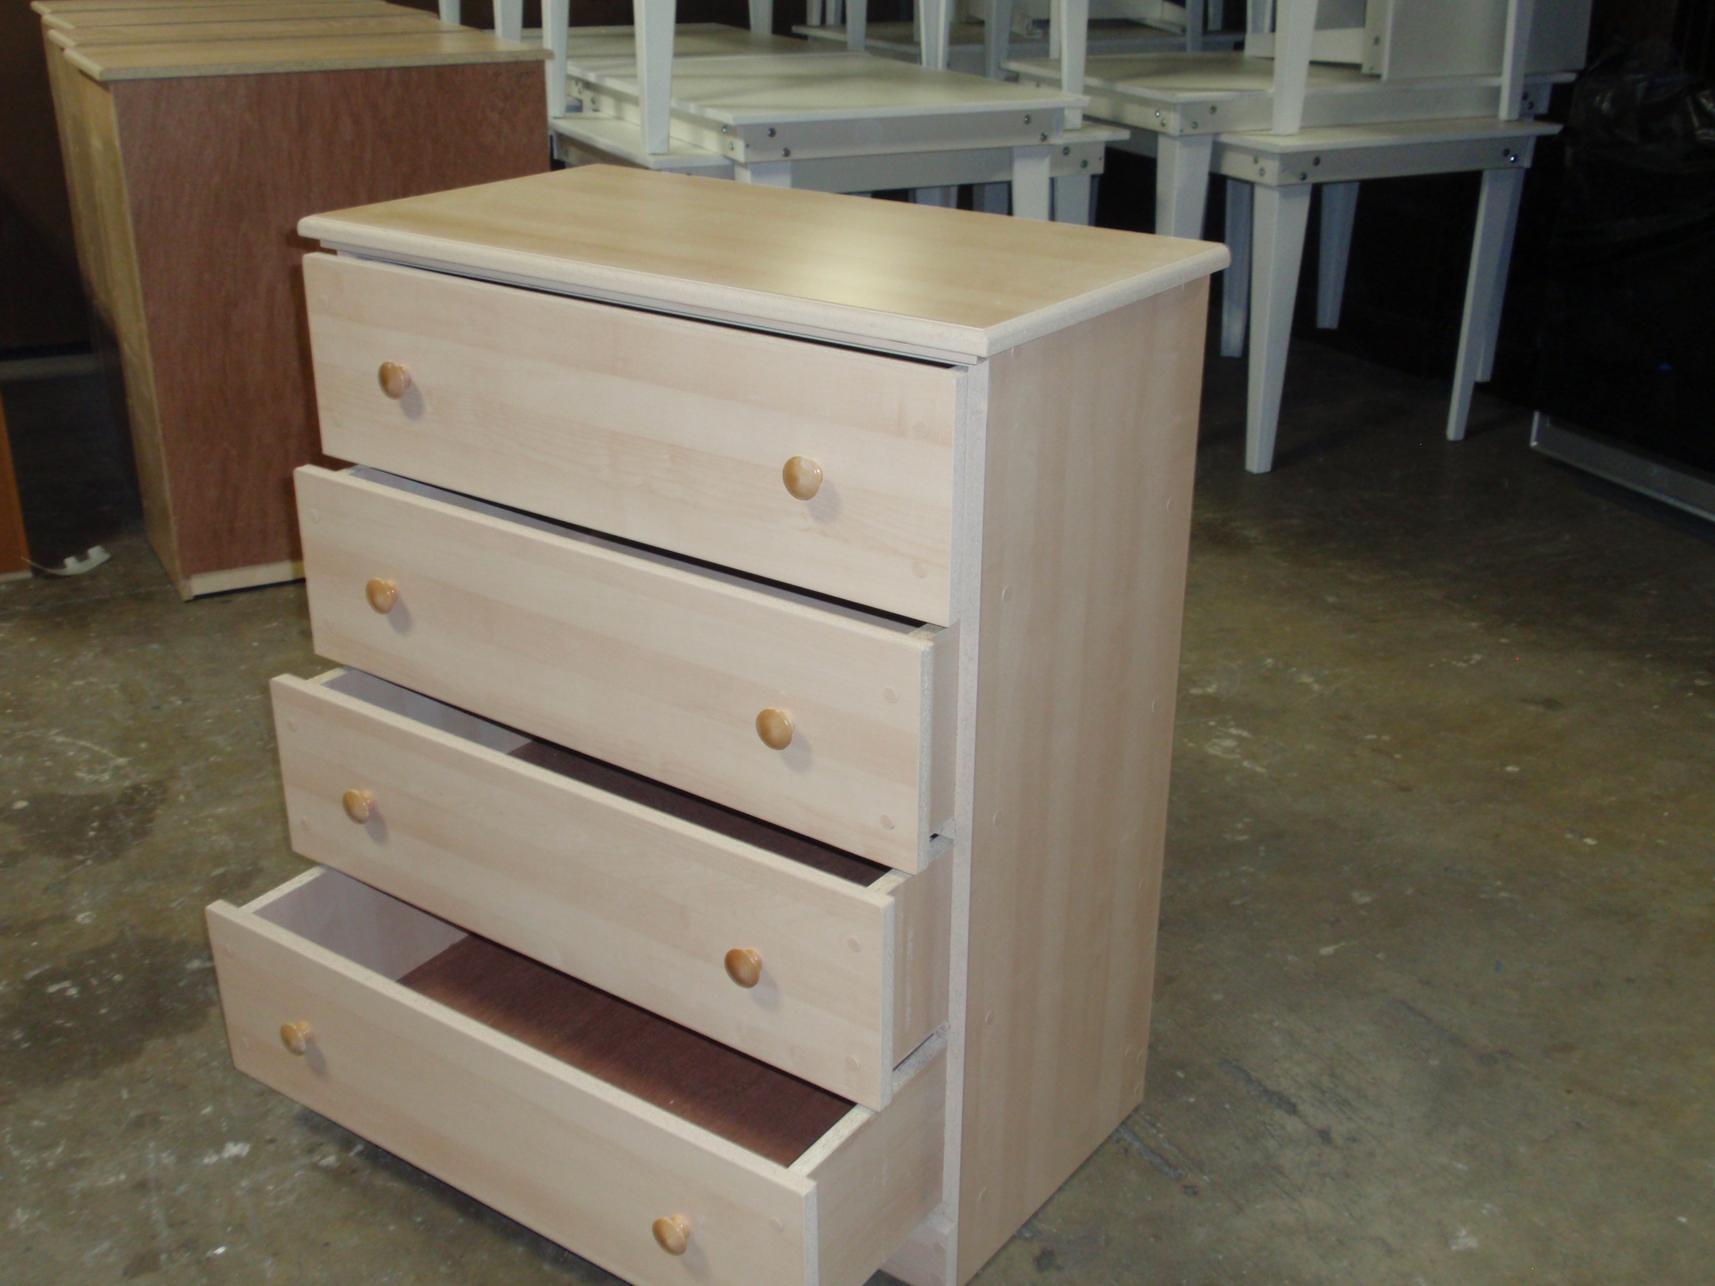 Dresser Building For Families In Need Woco